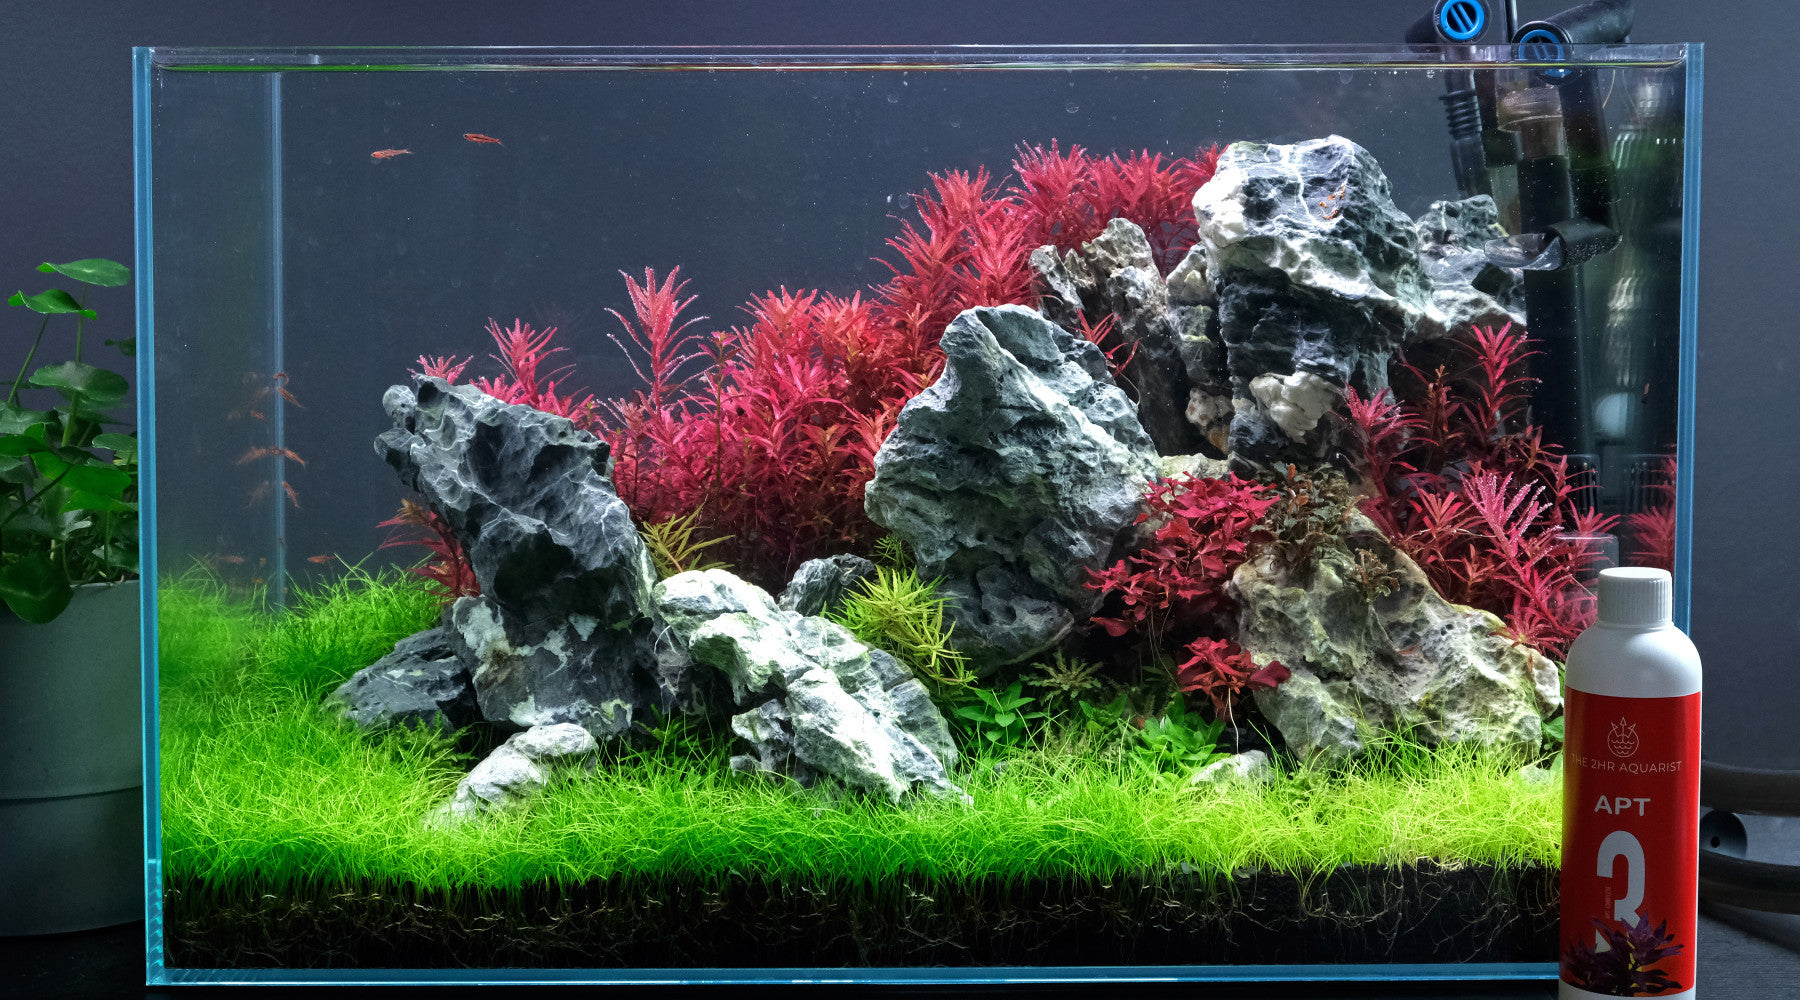 What Is A Good Level Of Gh In A Planted Aquarium? - The 2Hr Aquarist